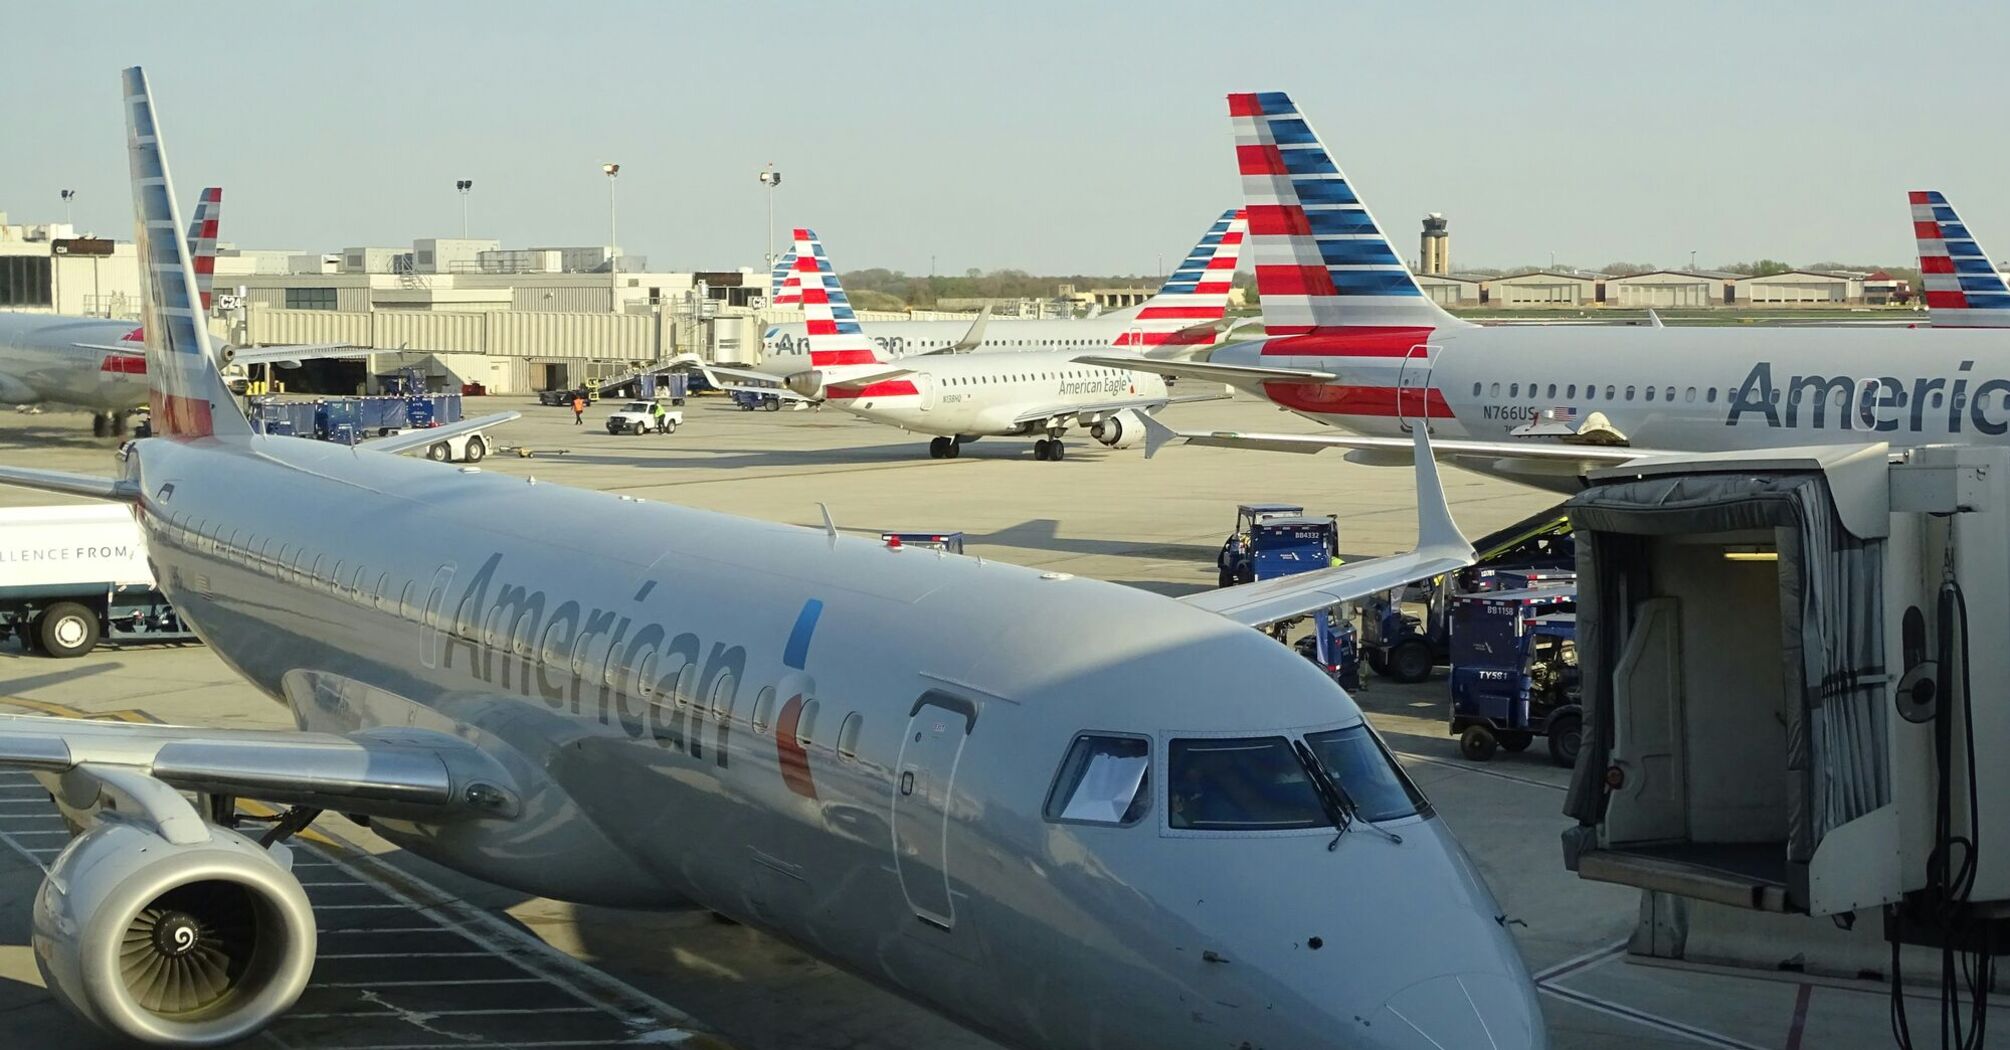 American Airlines aircraft at an airport gate and service vehicles in the background